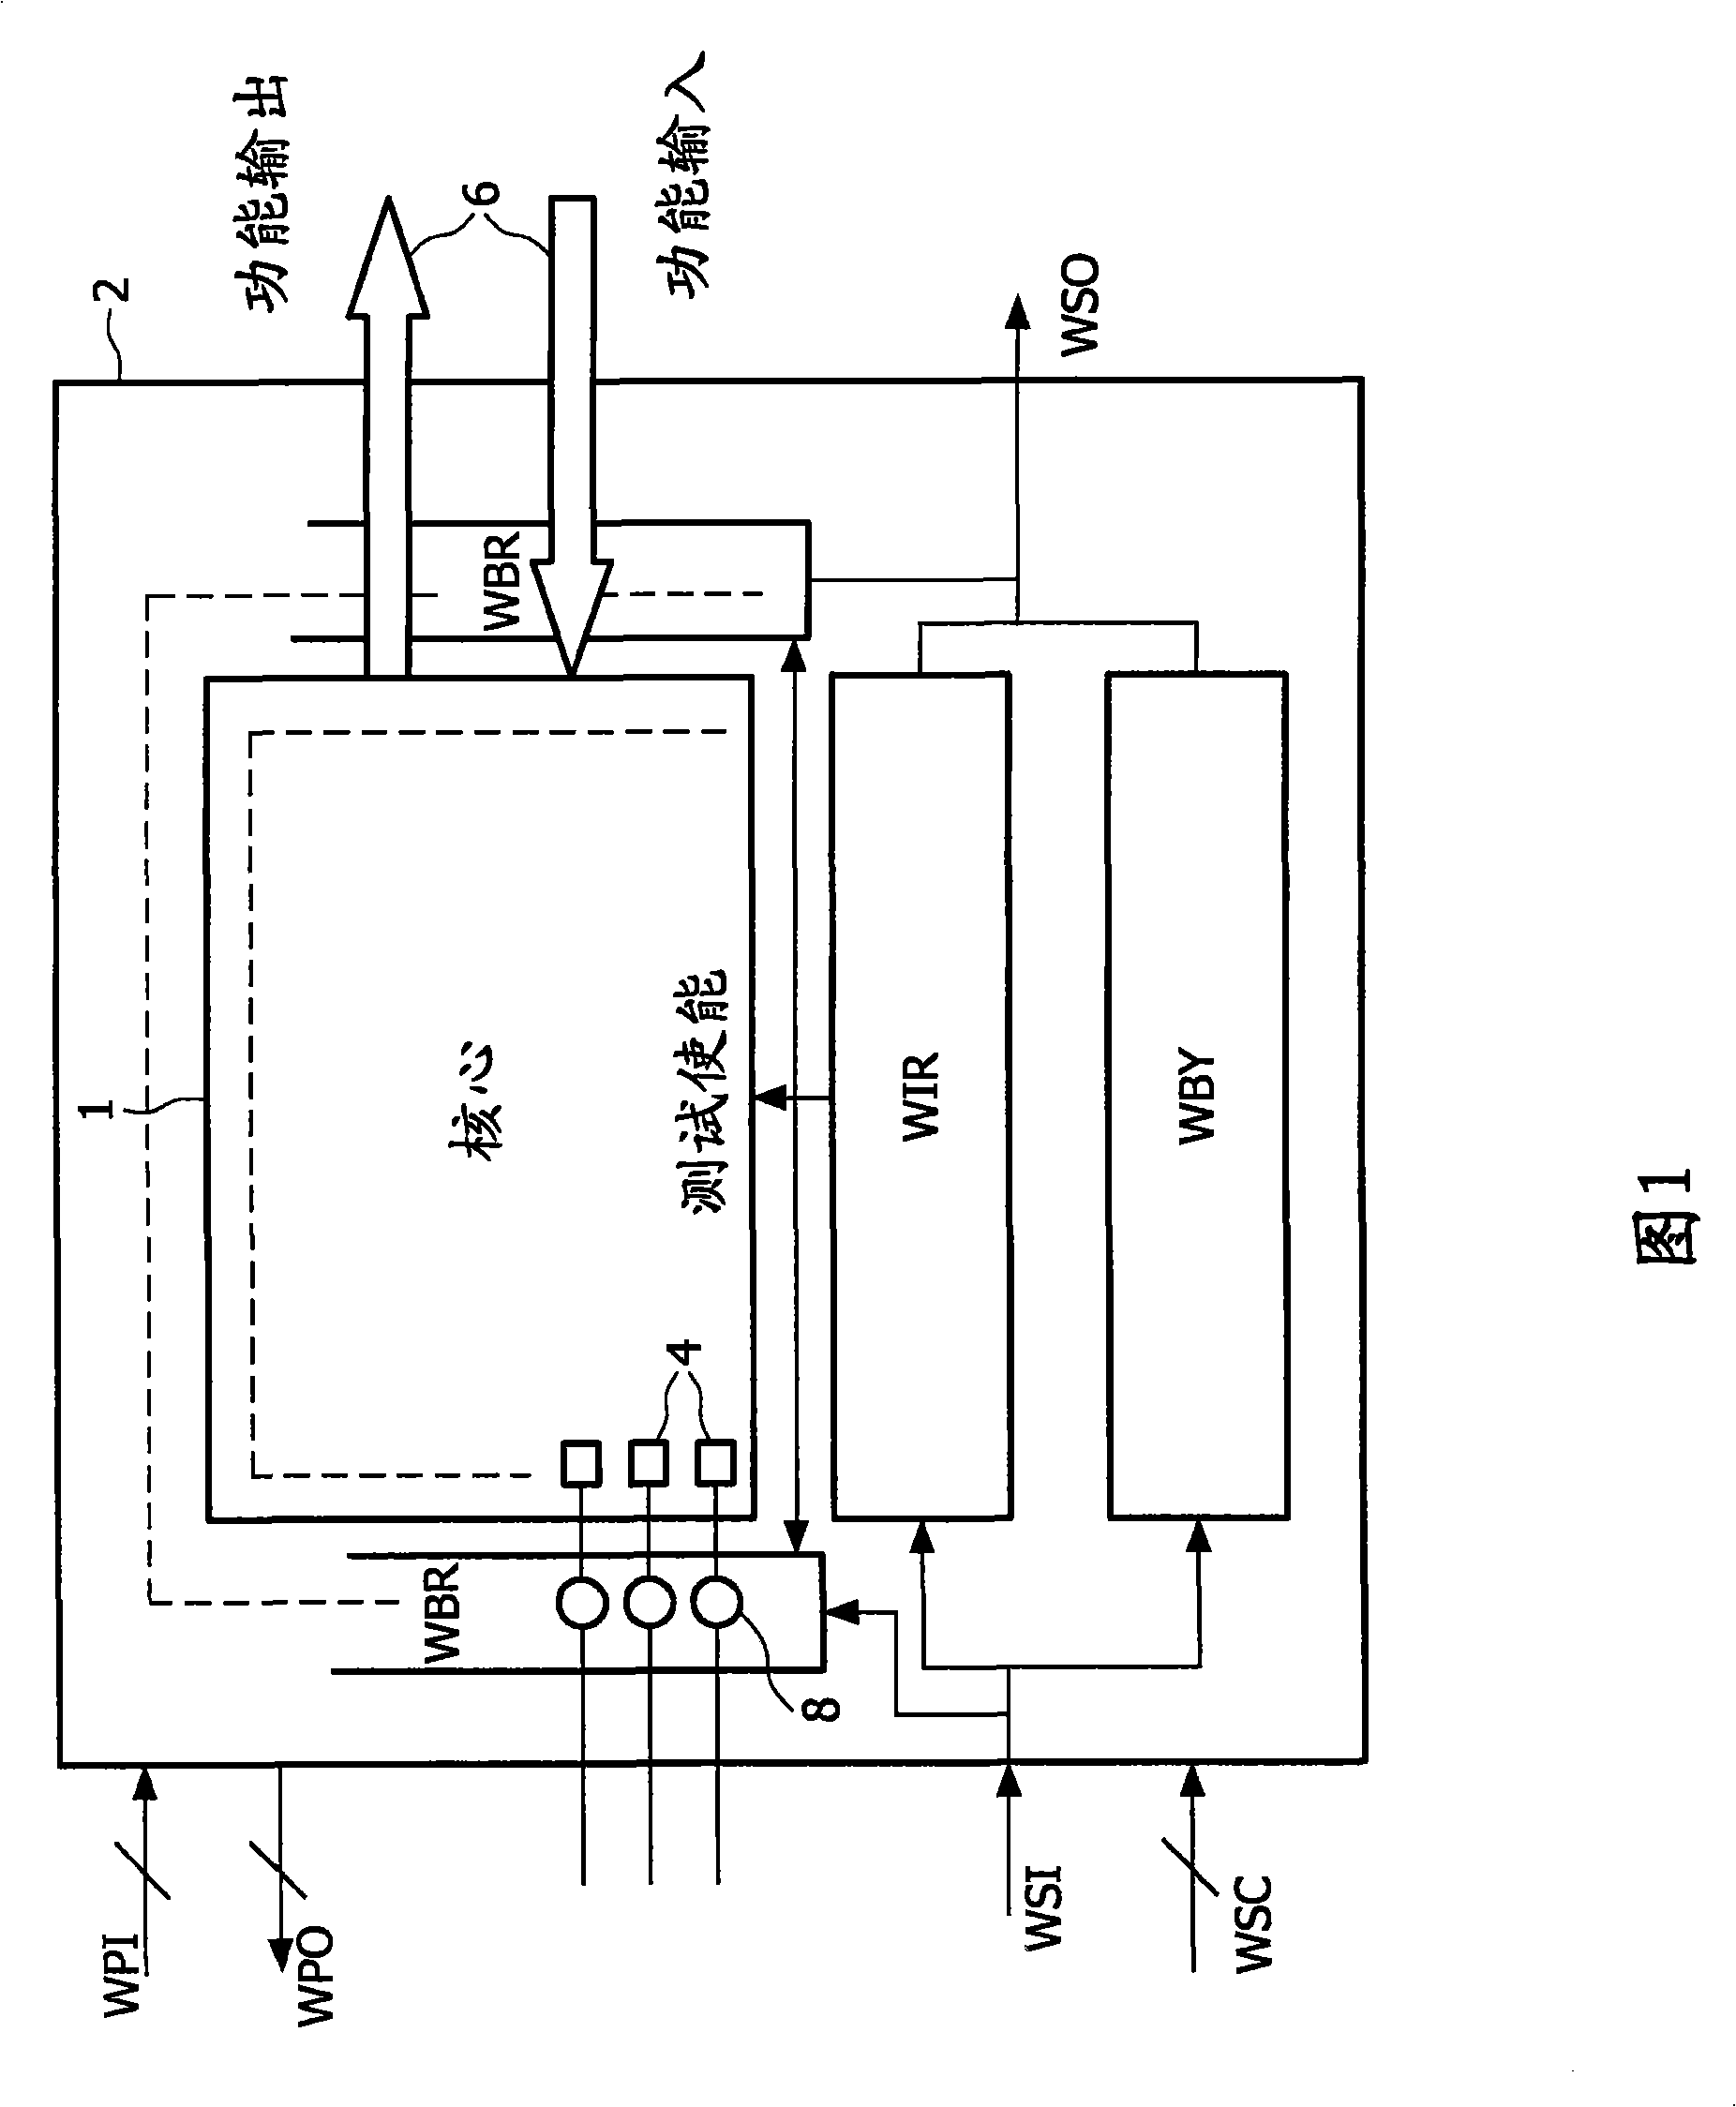 IC testing methods and apparatus